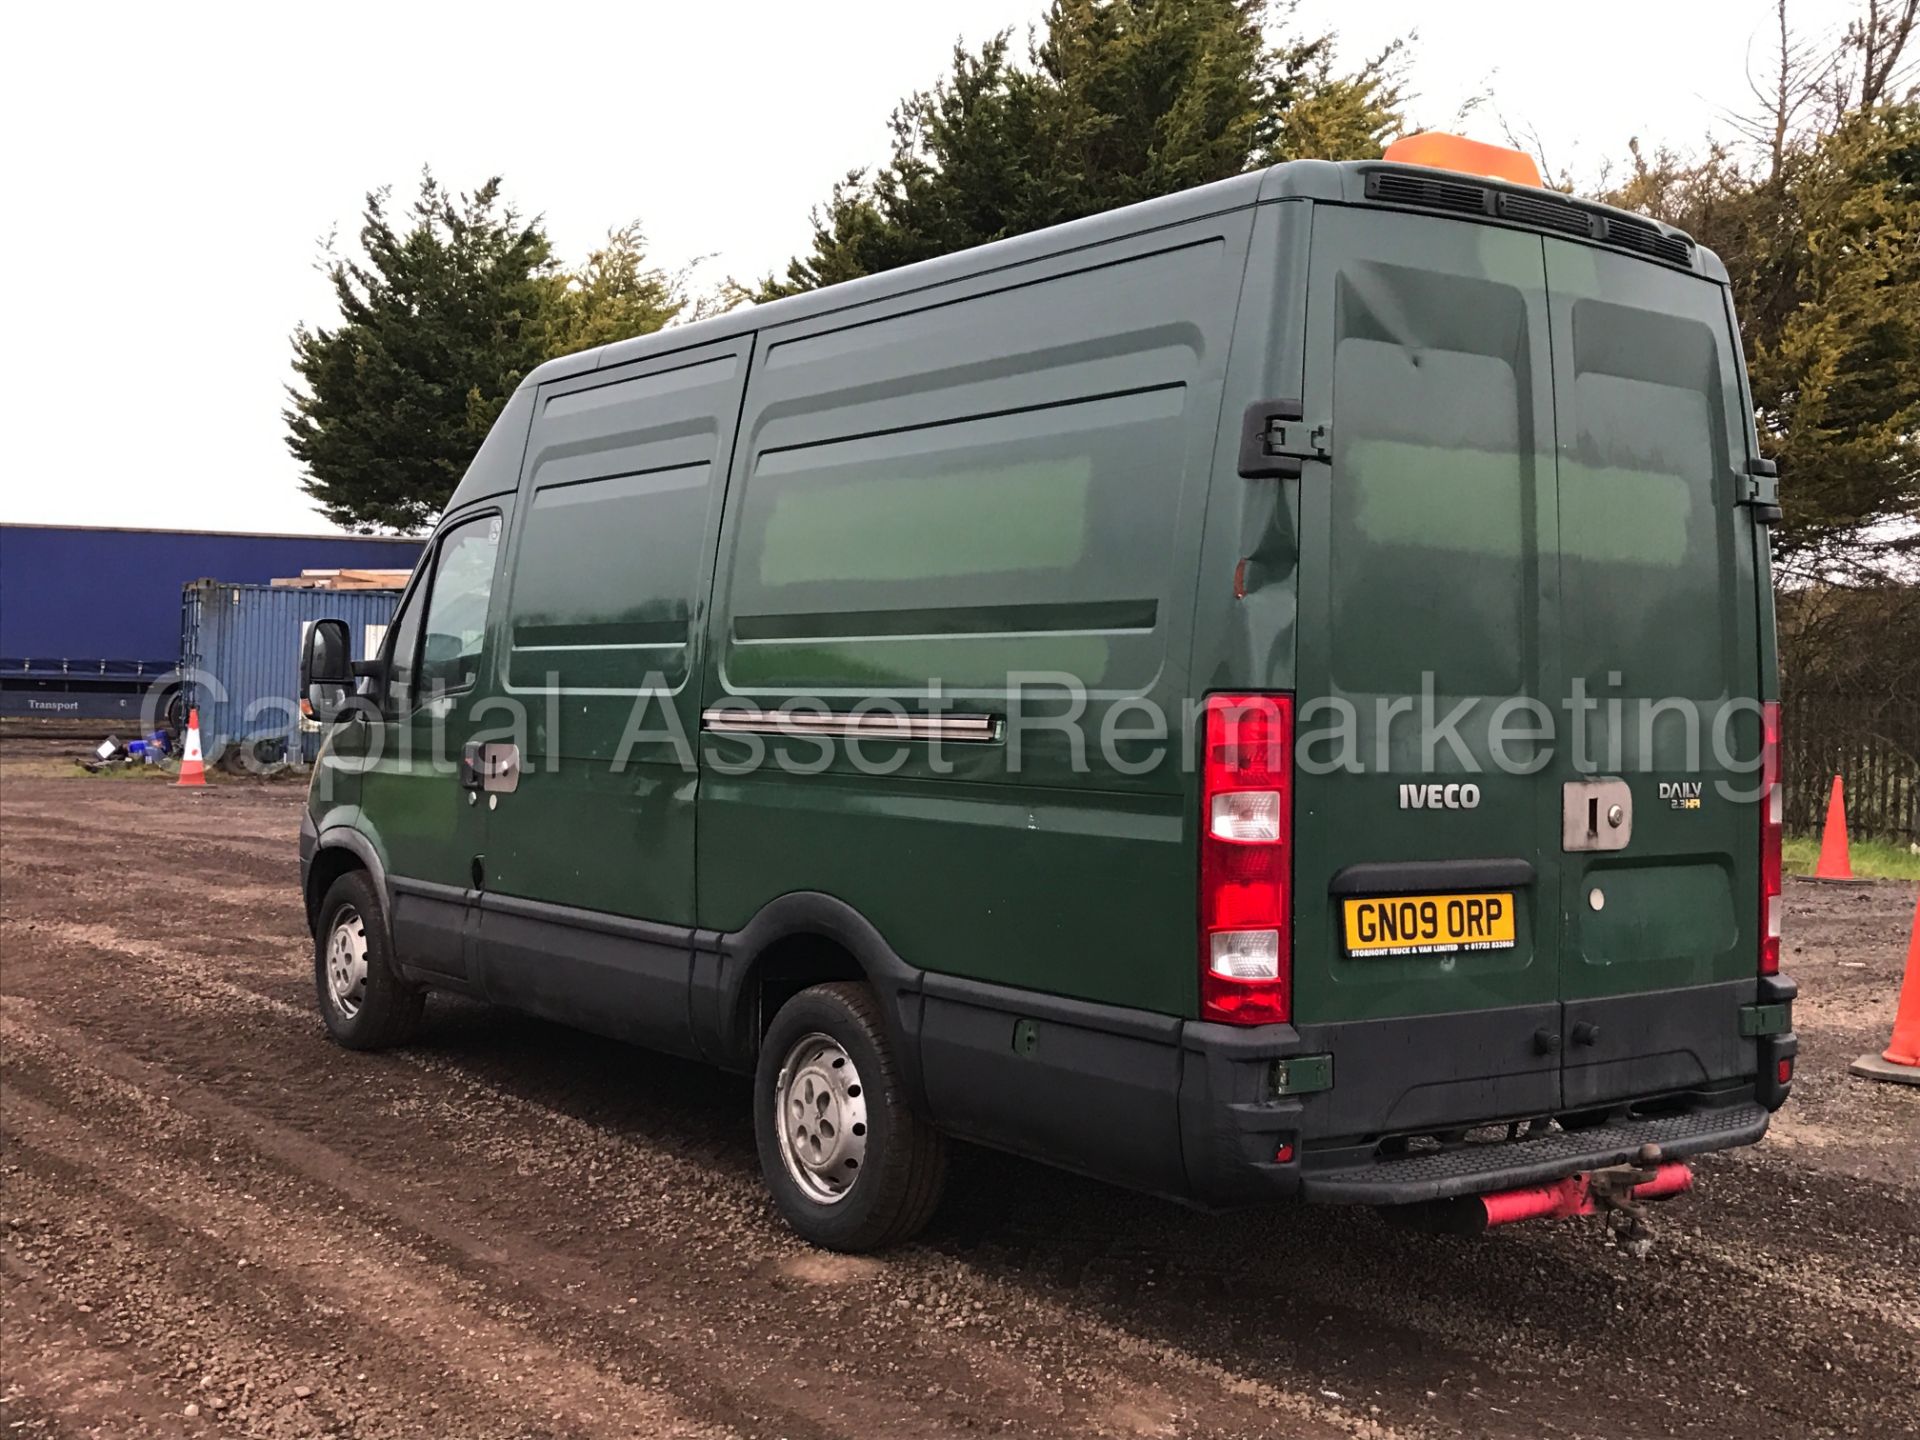 (On Sale) IVECO DAILY 35S12 'MWB HI-ROOF' (2009) '2.3 DIESEL - 120 BHP - 5 SPEED' (1 COMPANY OWNER) - Image 6 of 15